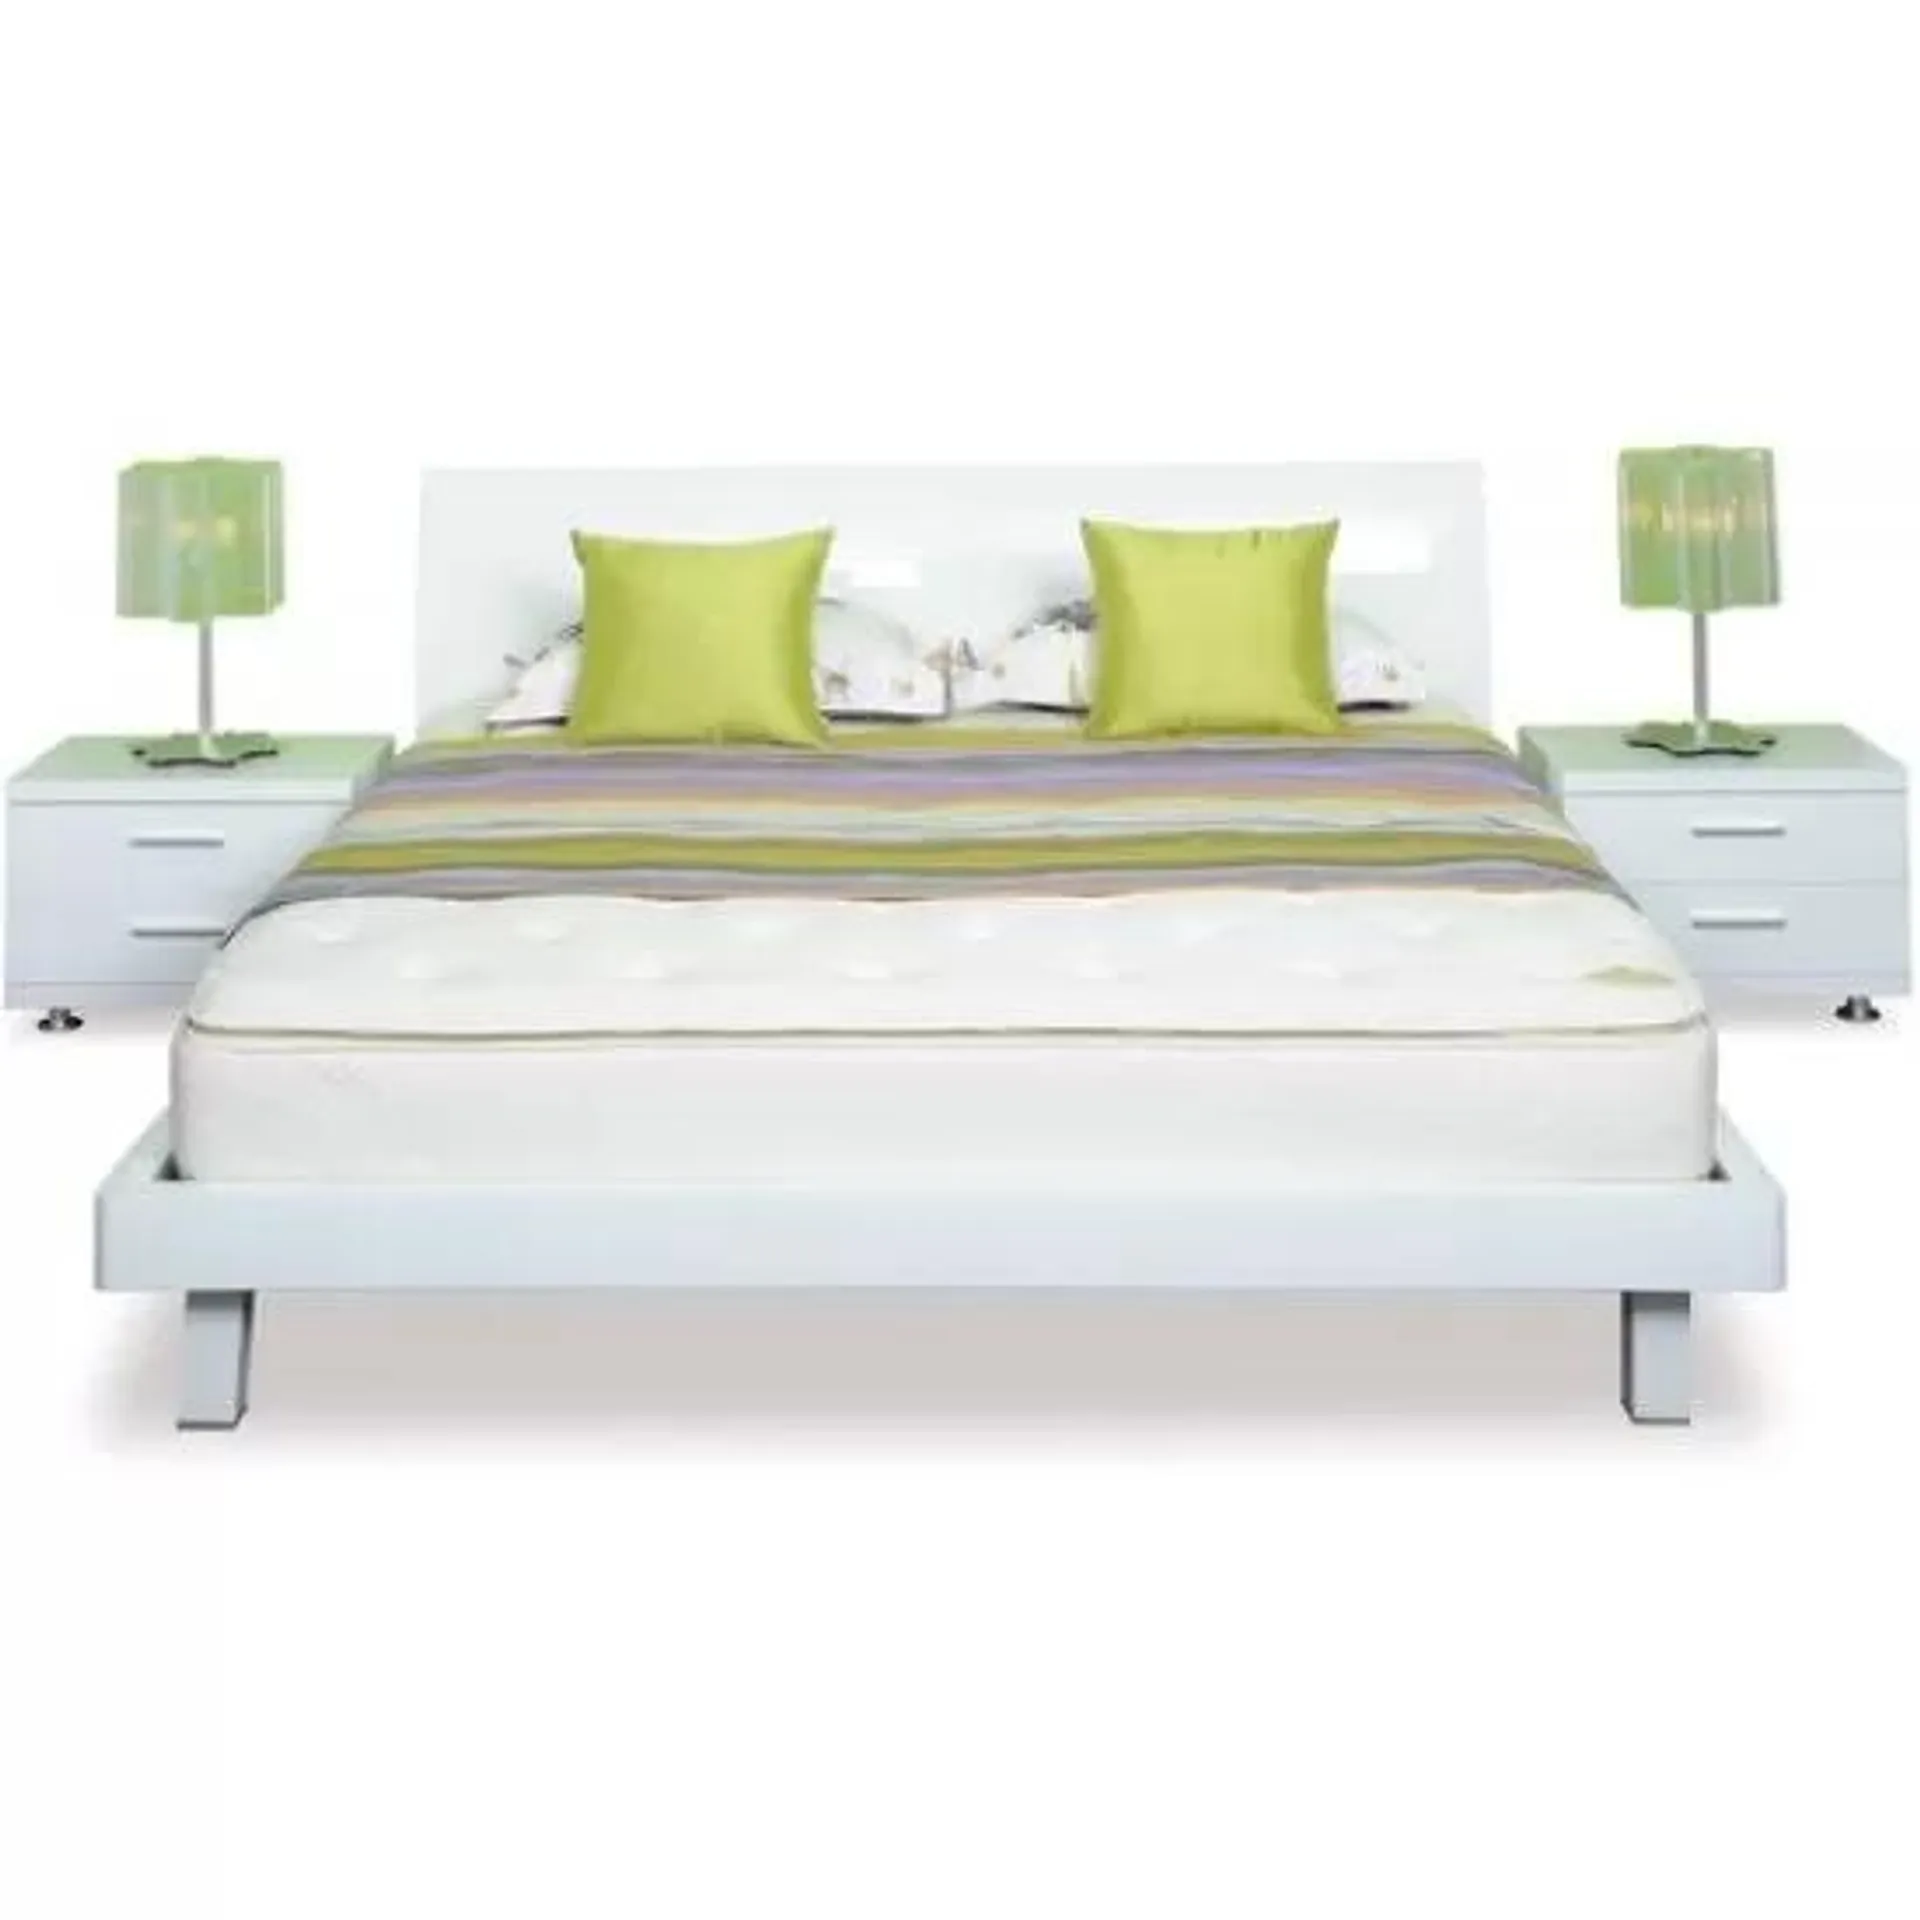 Arctic Slat Bed Queen Frame and Headboard